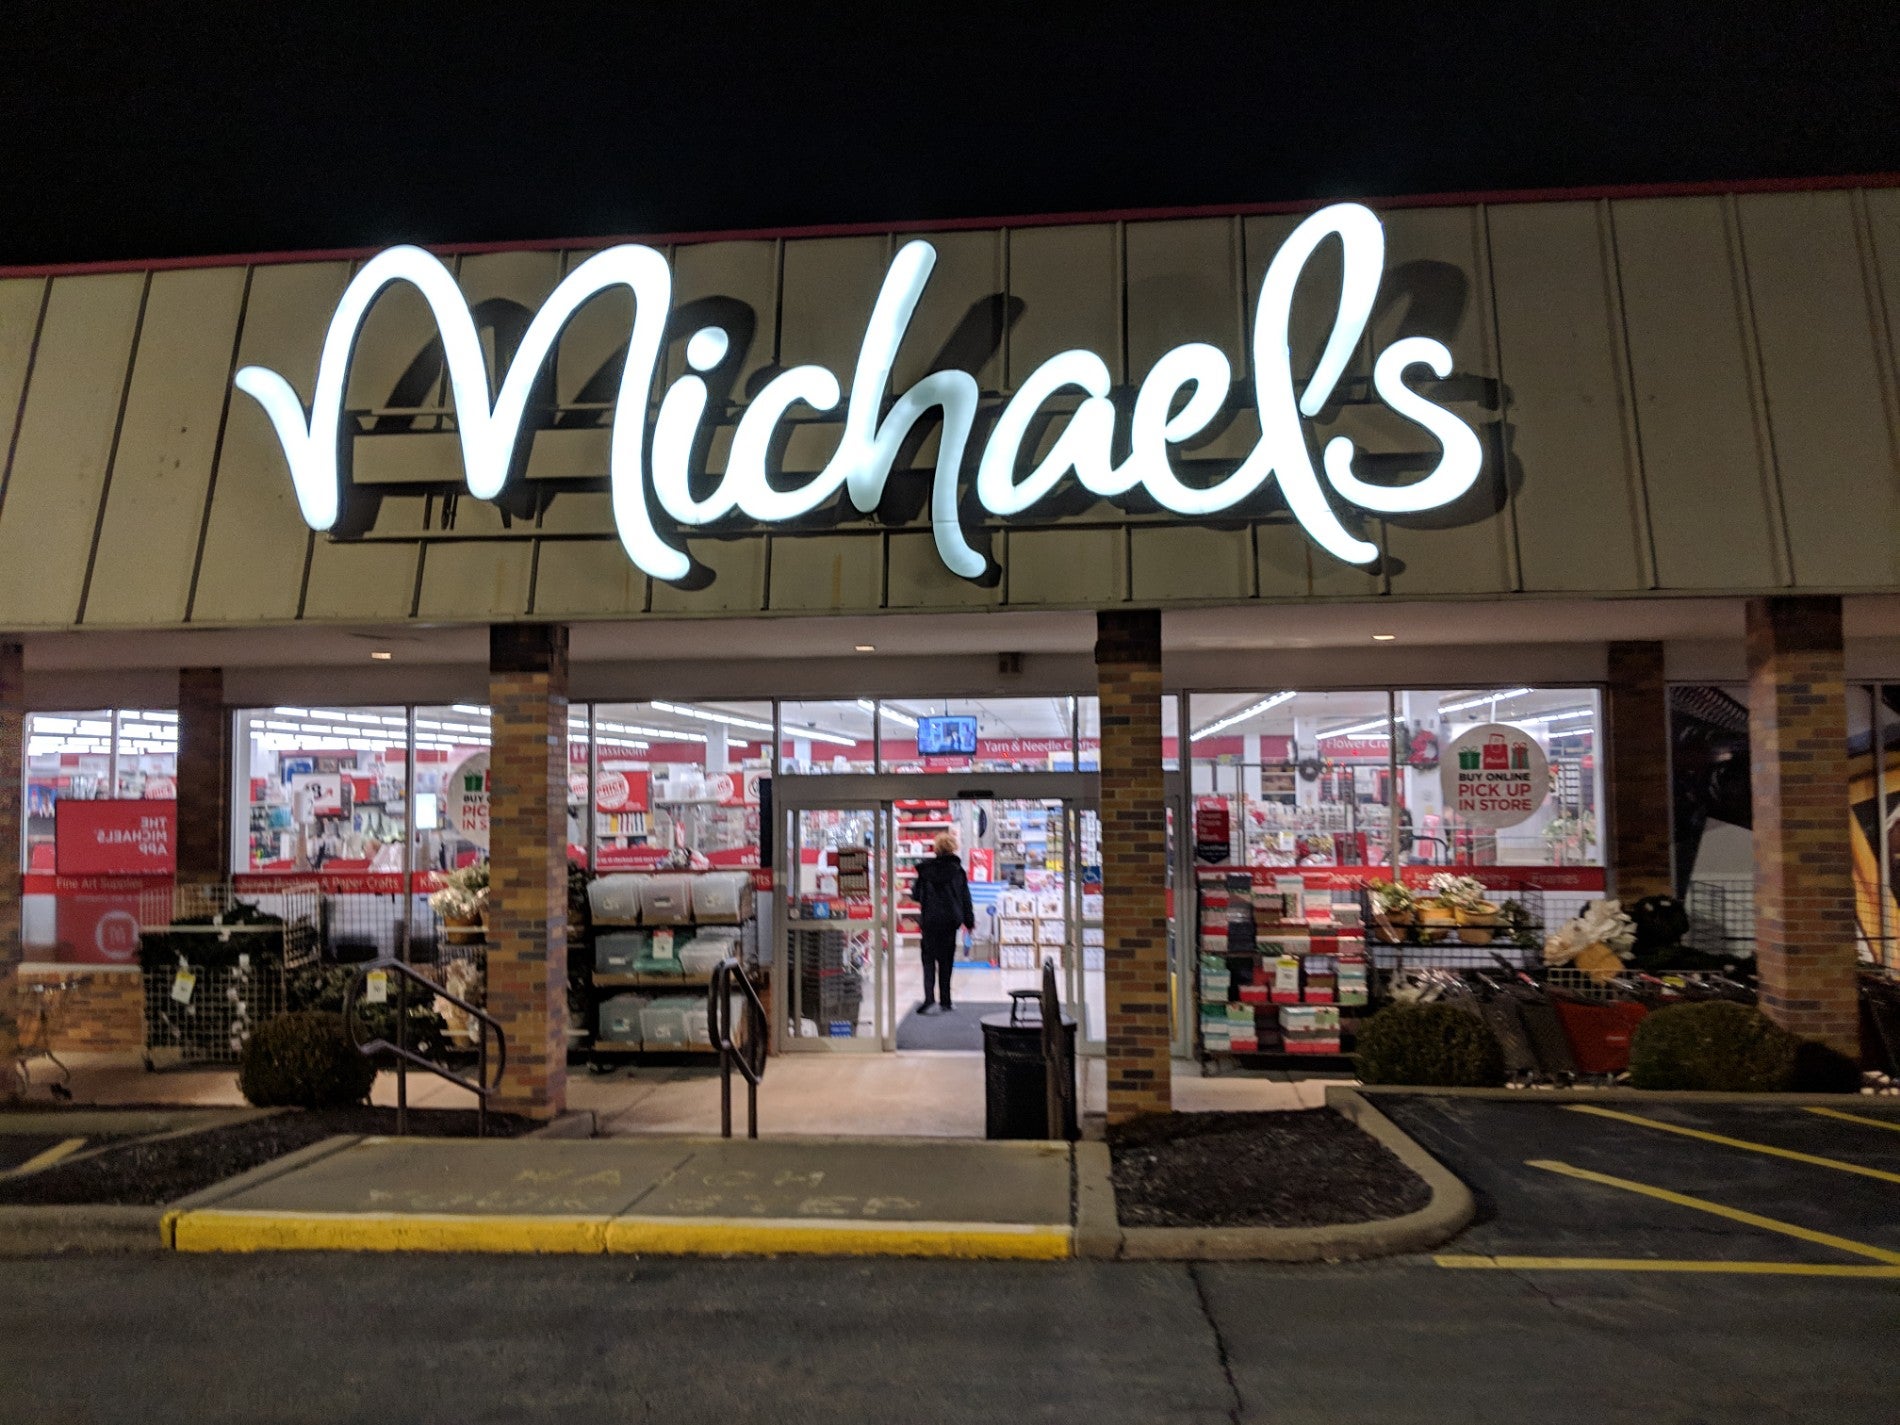 Arts and crafts retailer Michaels opens its version of  called